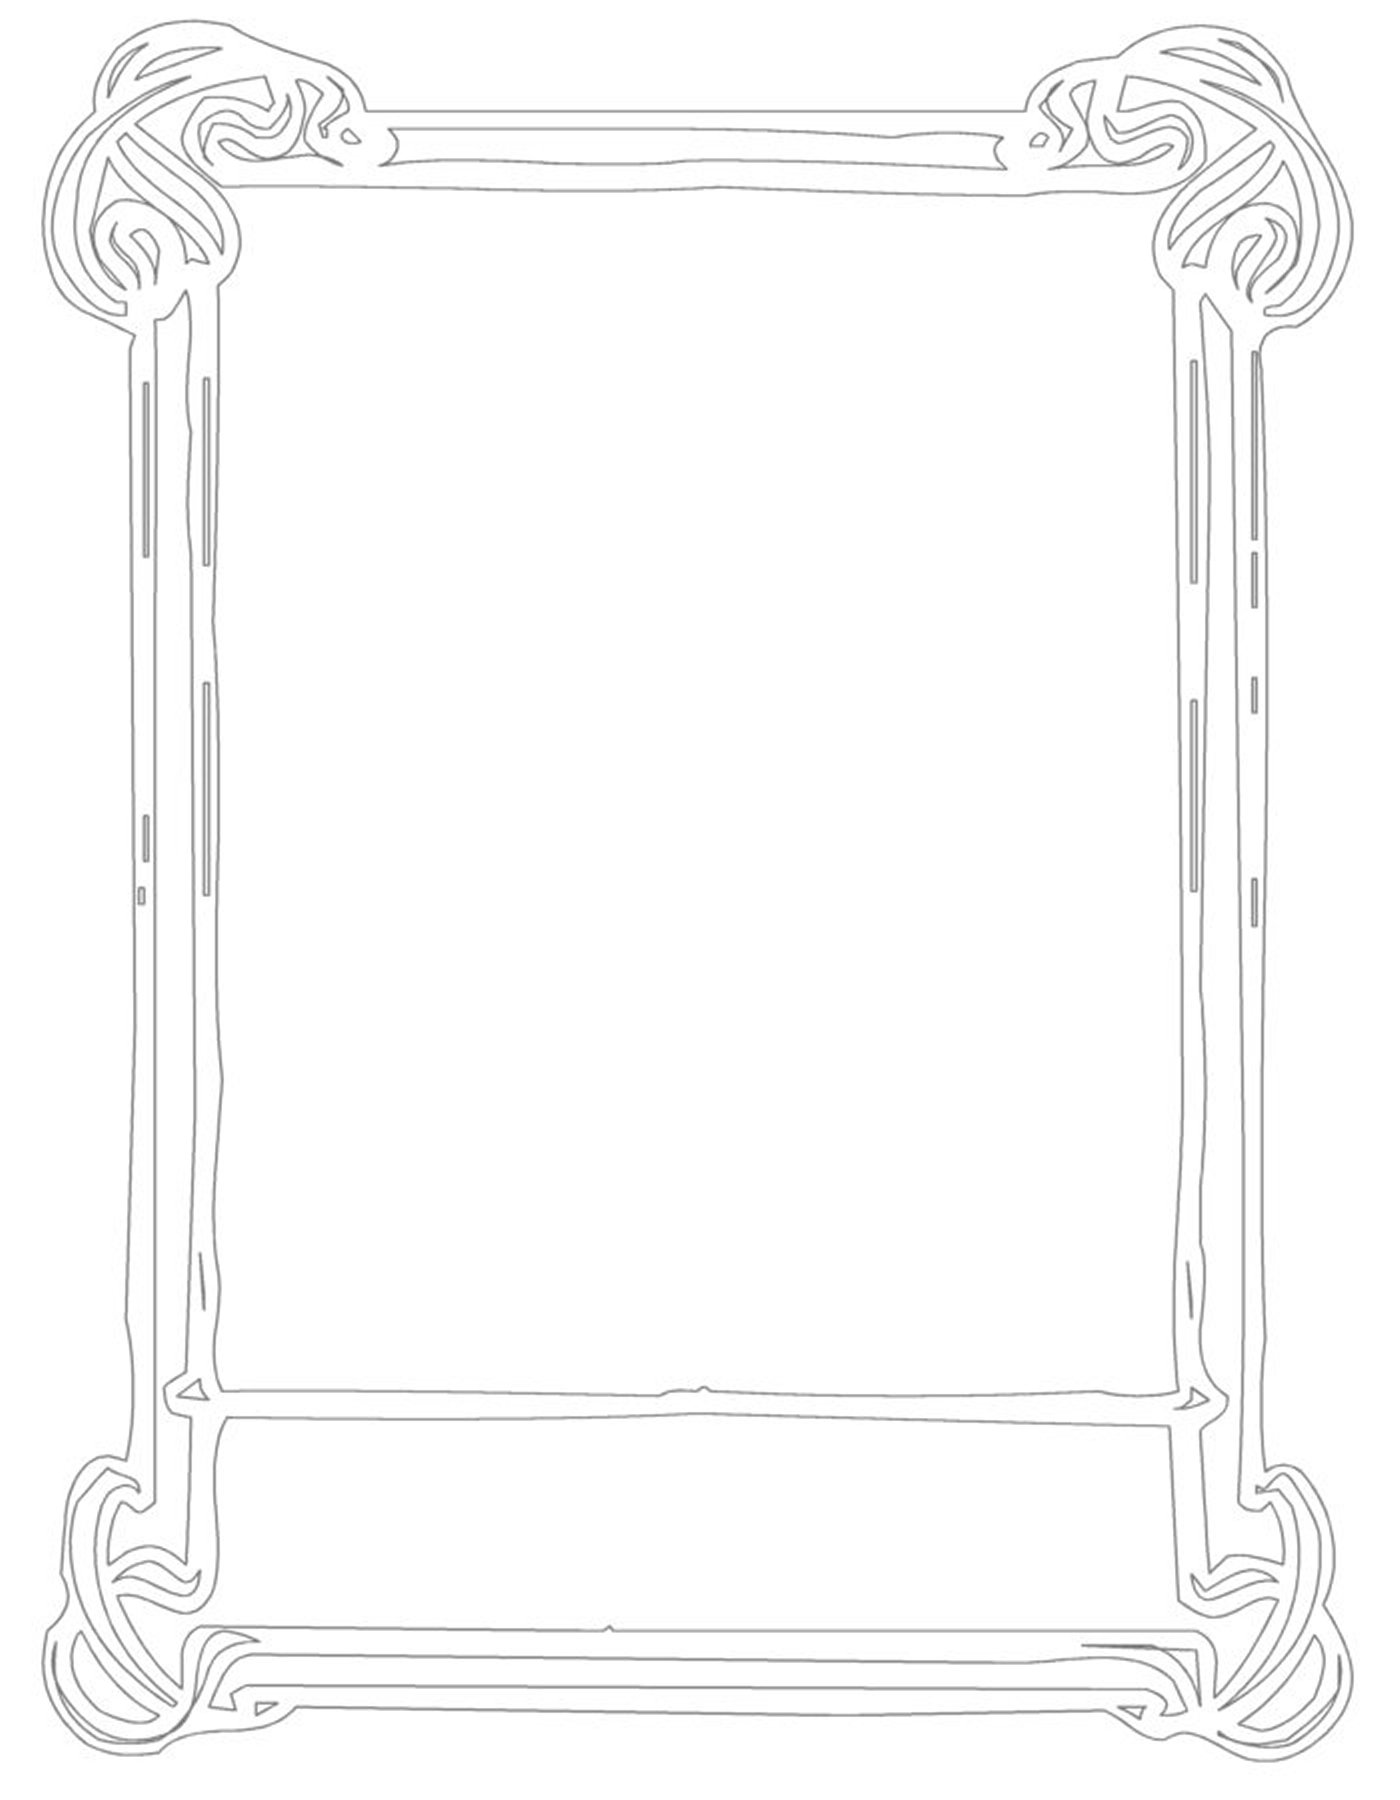 a black and white po frame with an ornate design